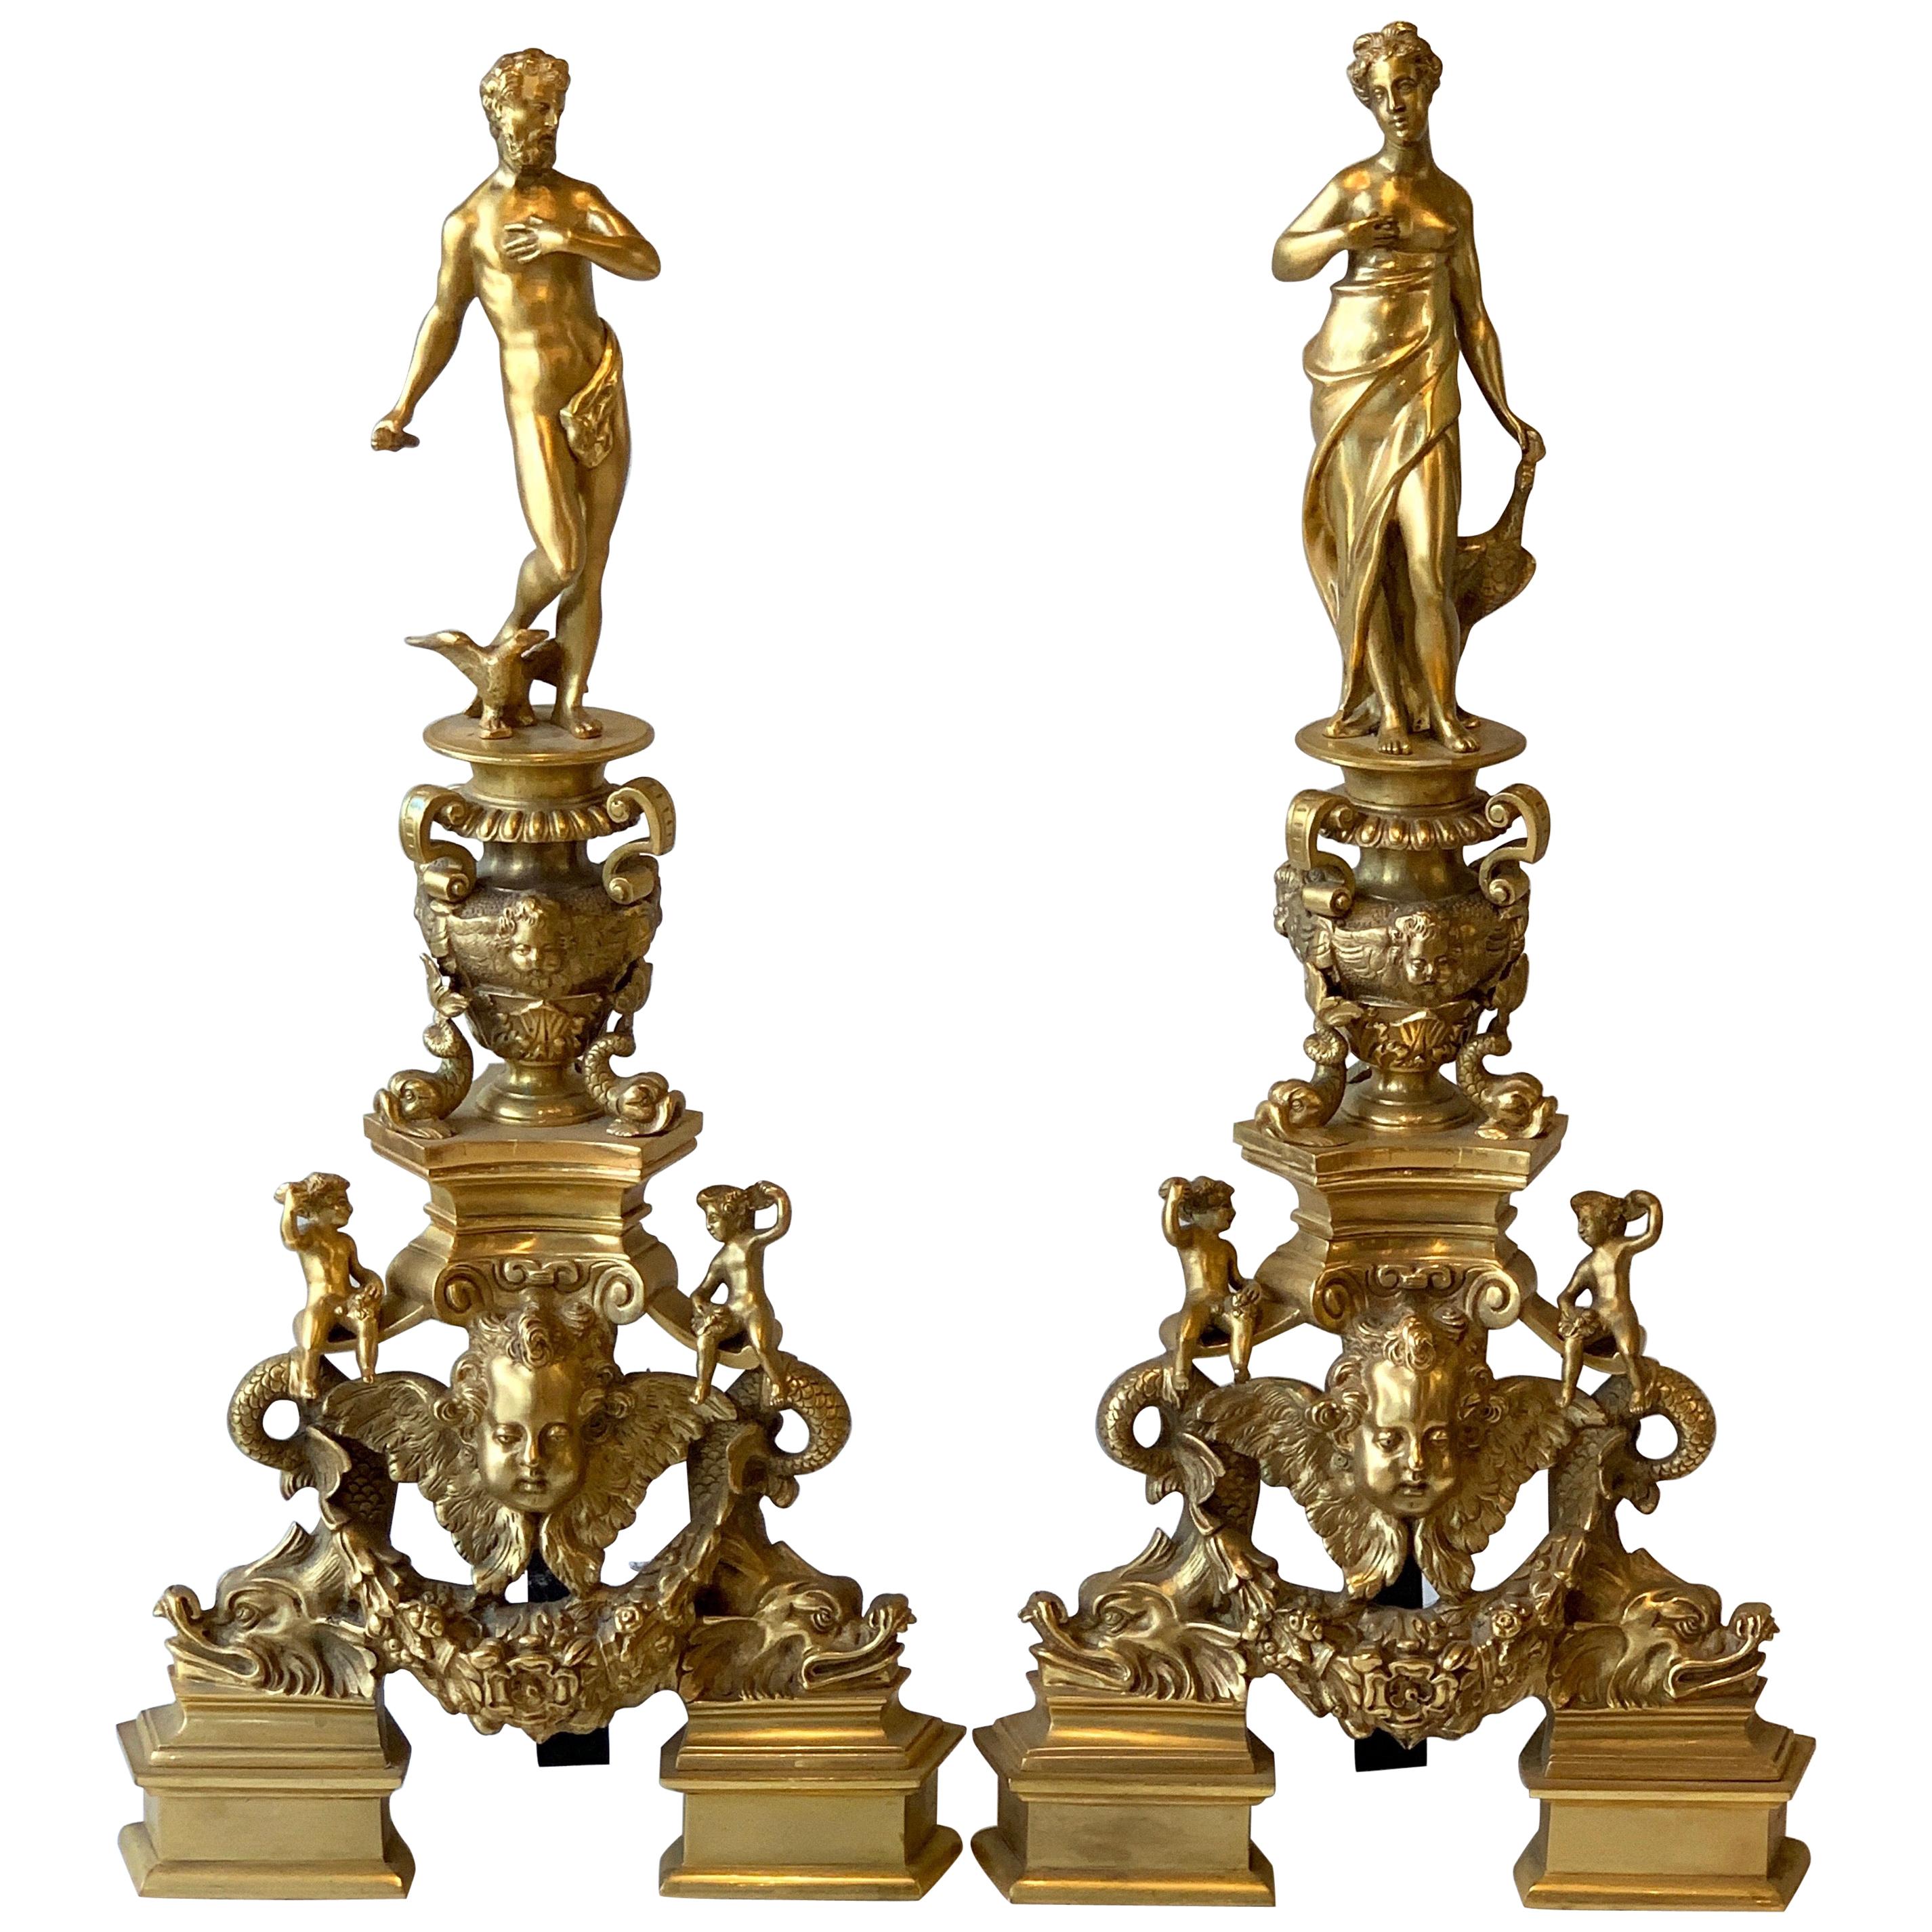 Monumental Pair of French Gilt Bronze Chenets